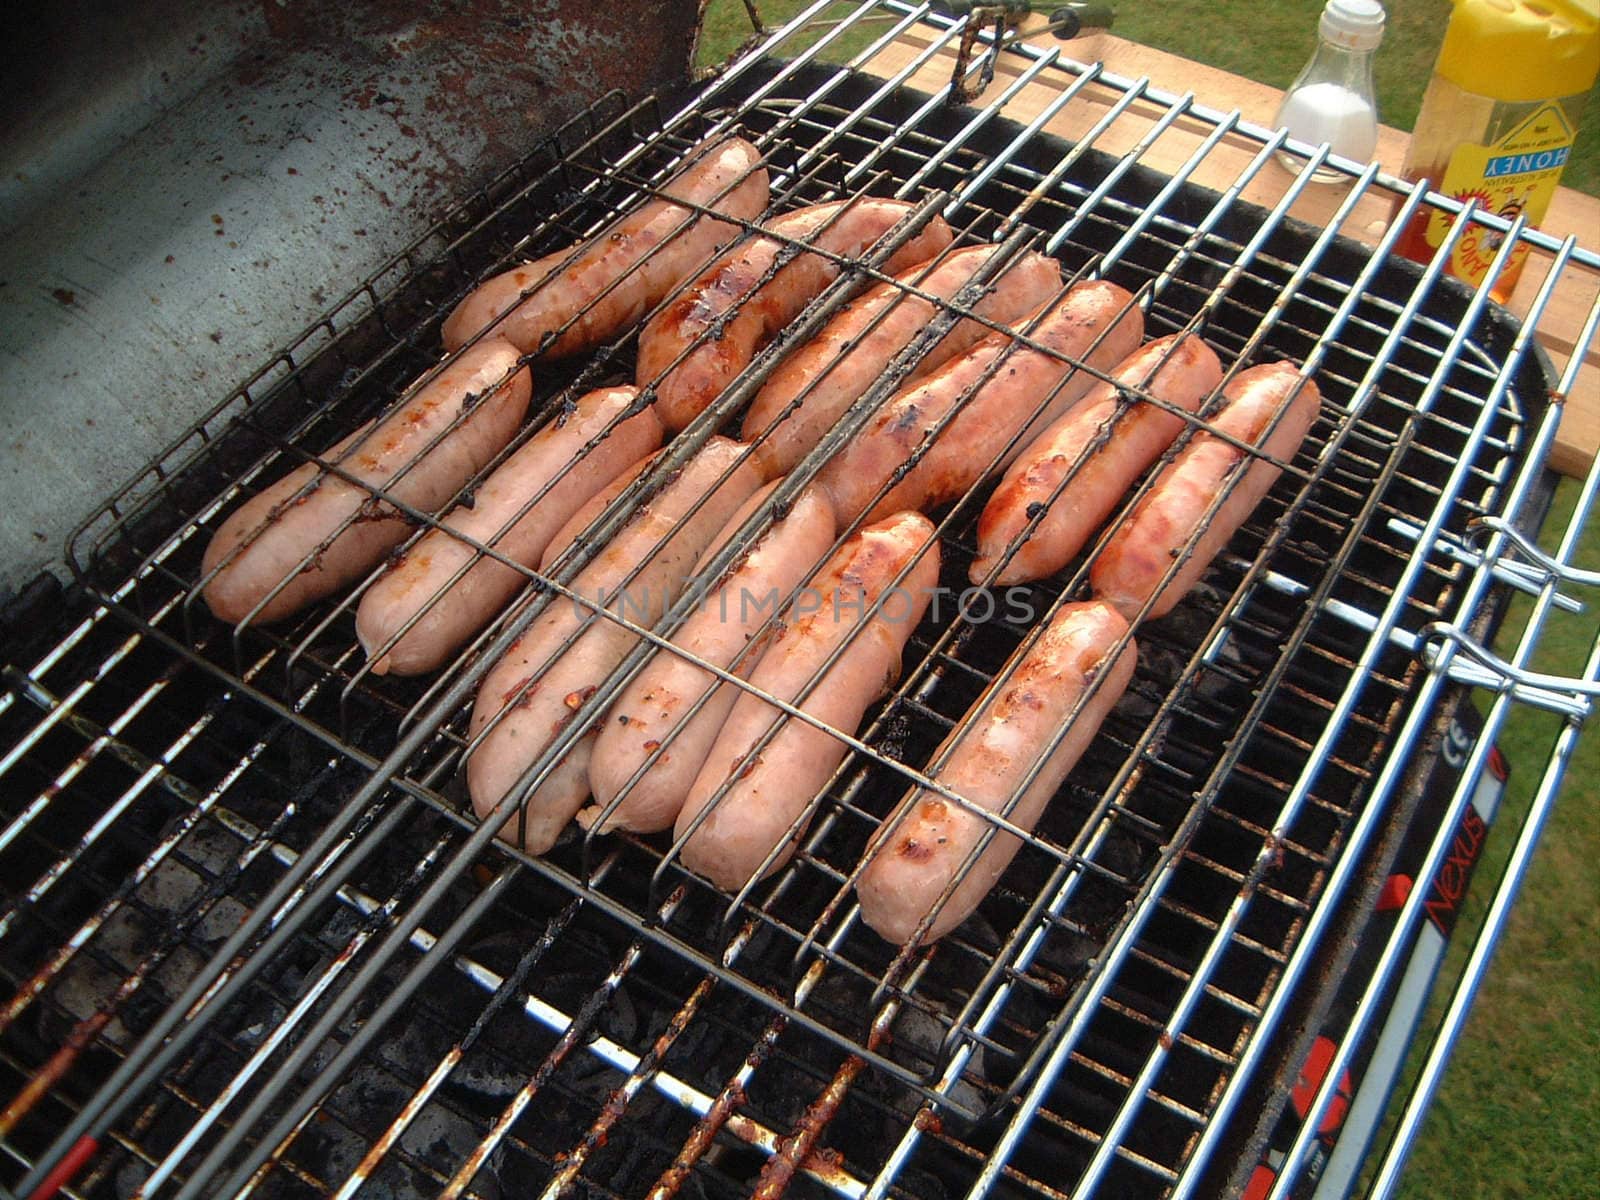 Sausages Cooking on a Barbecue